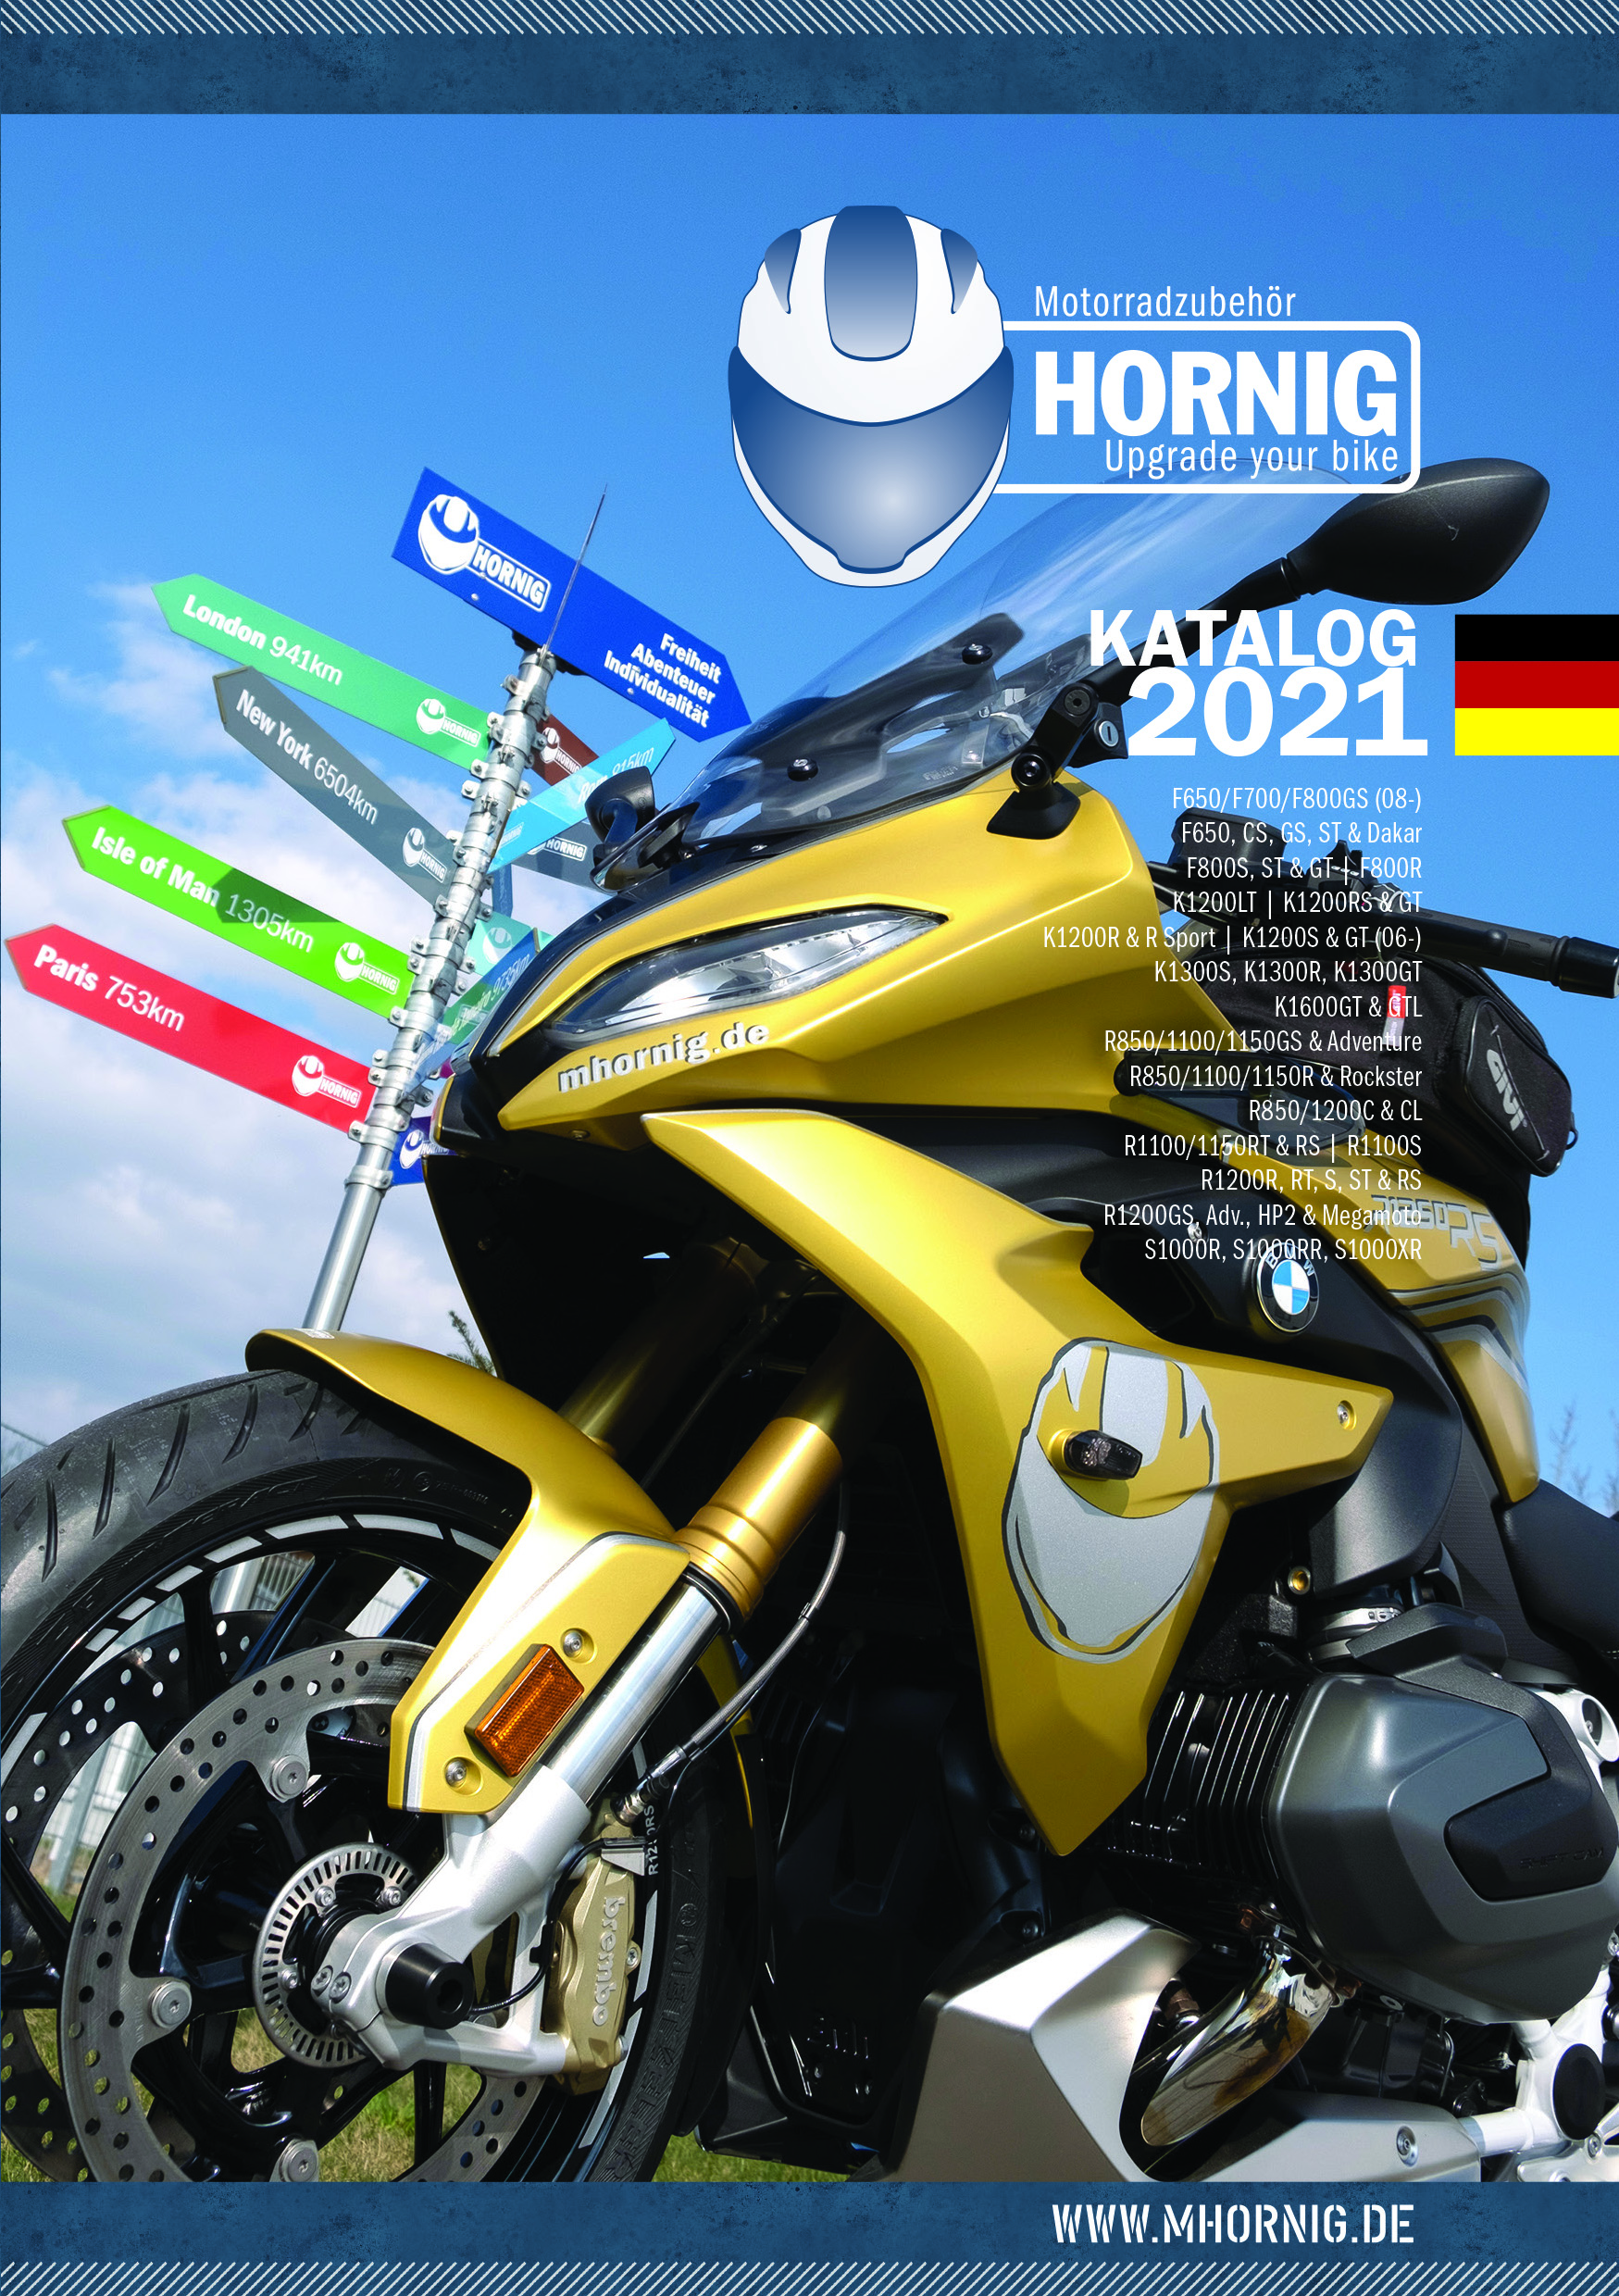 New BMW motorcycle accessory catalogue by Hornig pre-order now for